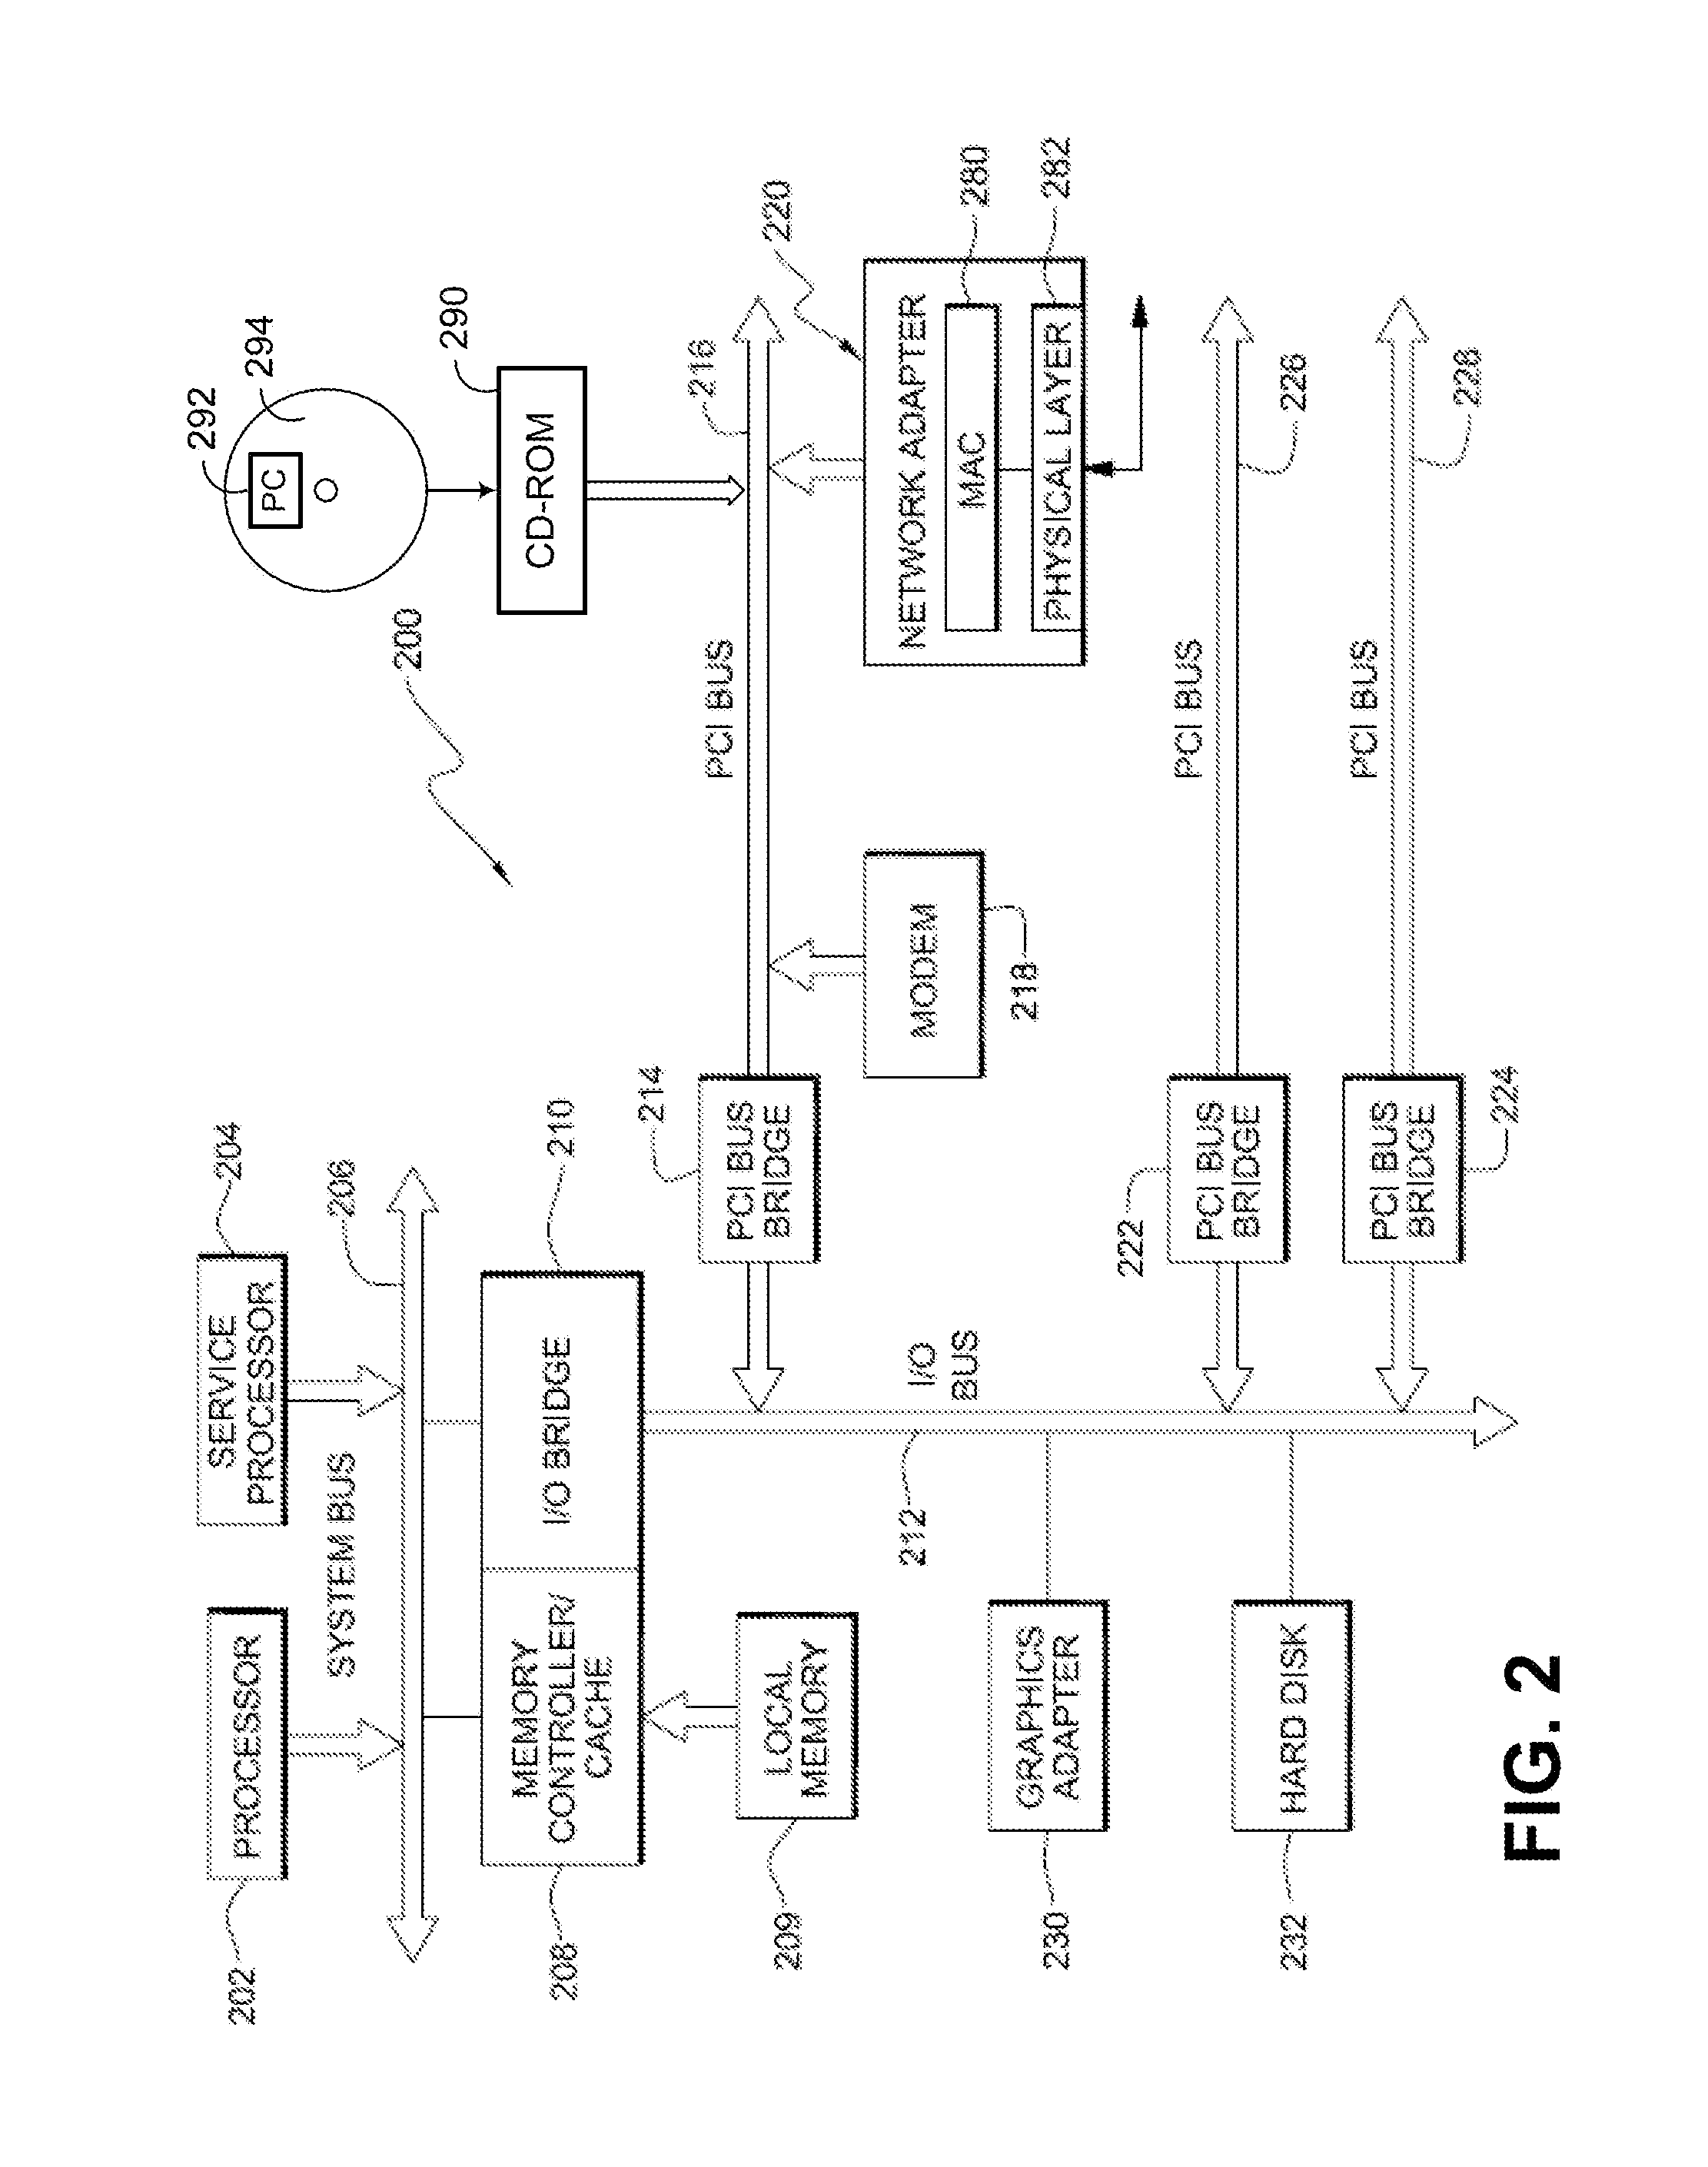 PRESERVING TRAFFIC CLASS PRIORITY QoS WITH SELF-VIRTUALIZING INPUT/OUTPUT DEVICE